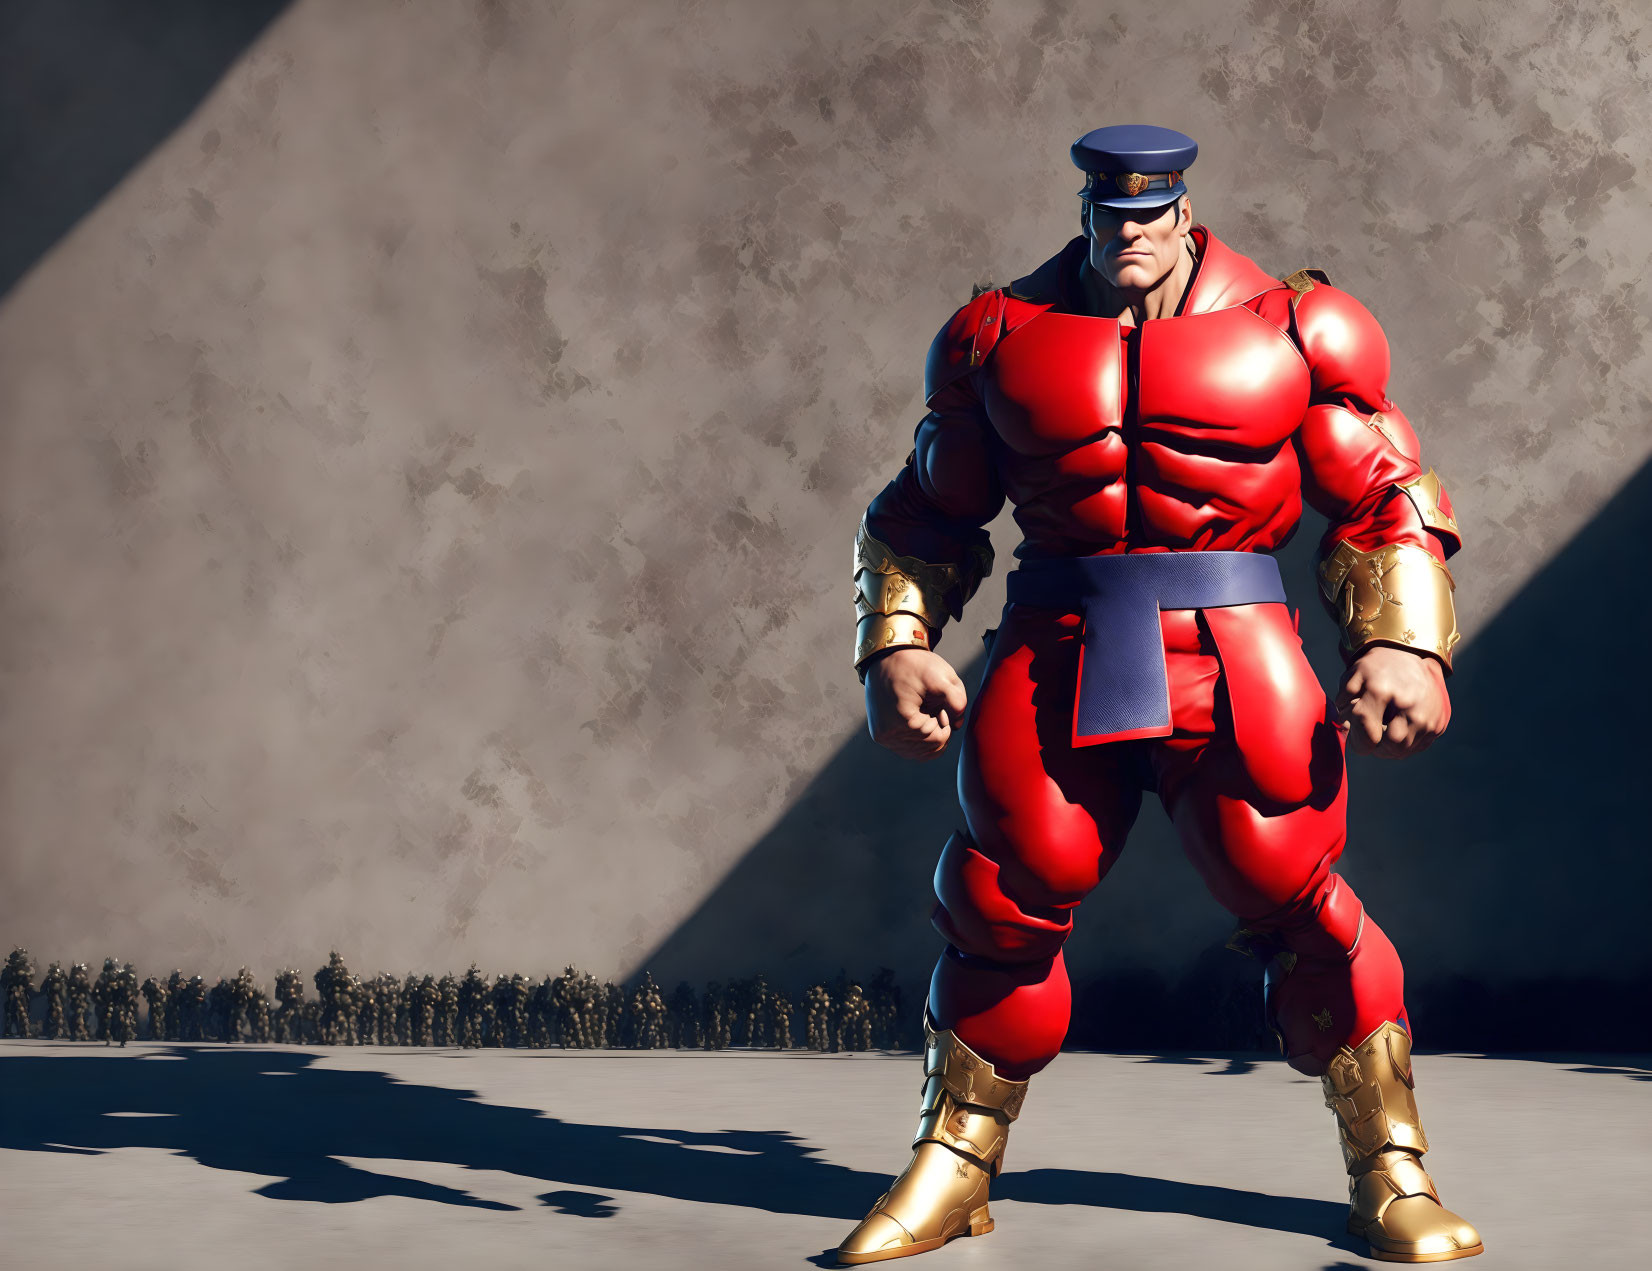 Muscular animated superhero in red and gold costume with blue cap standing confidently in sunlit area with long